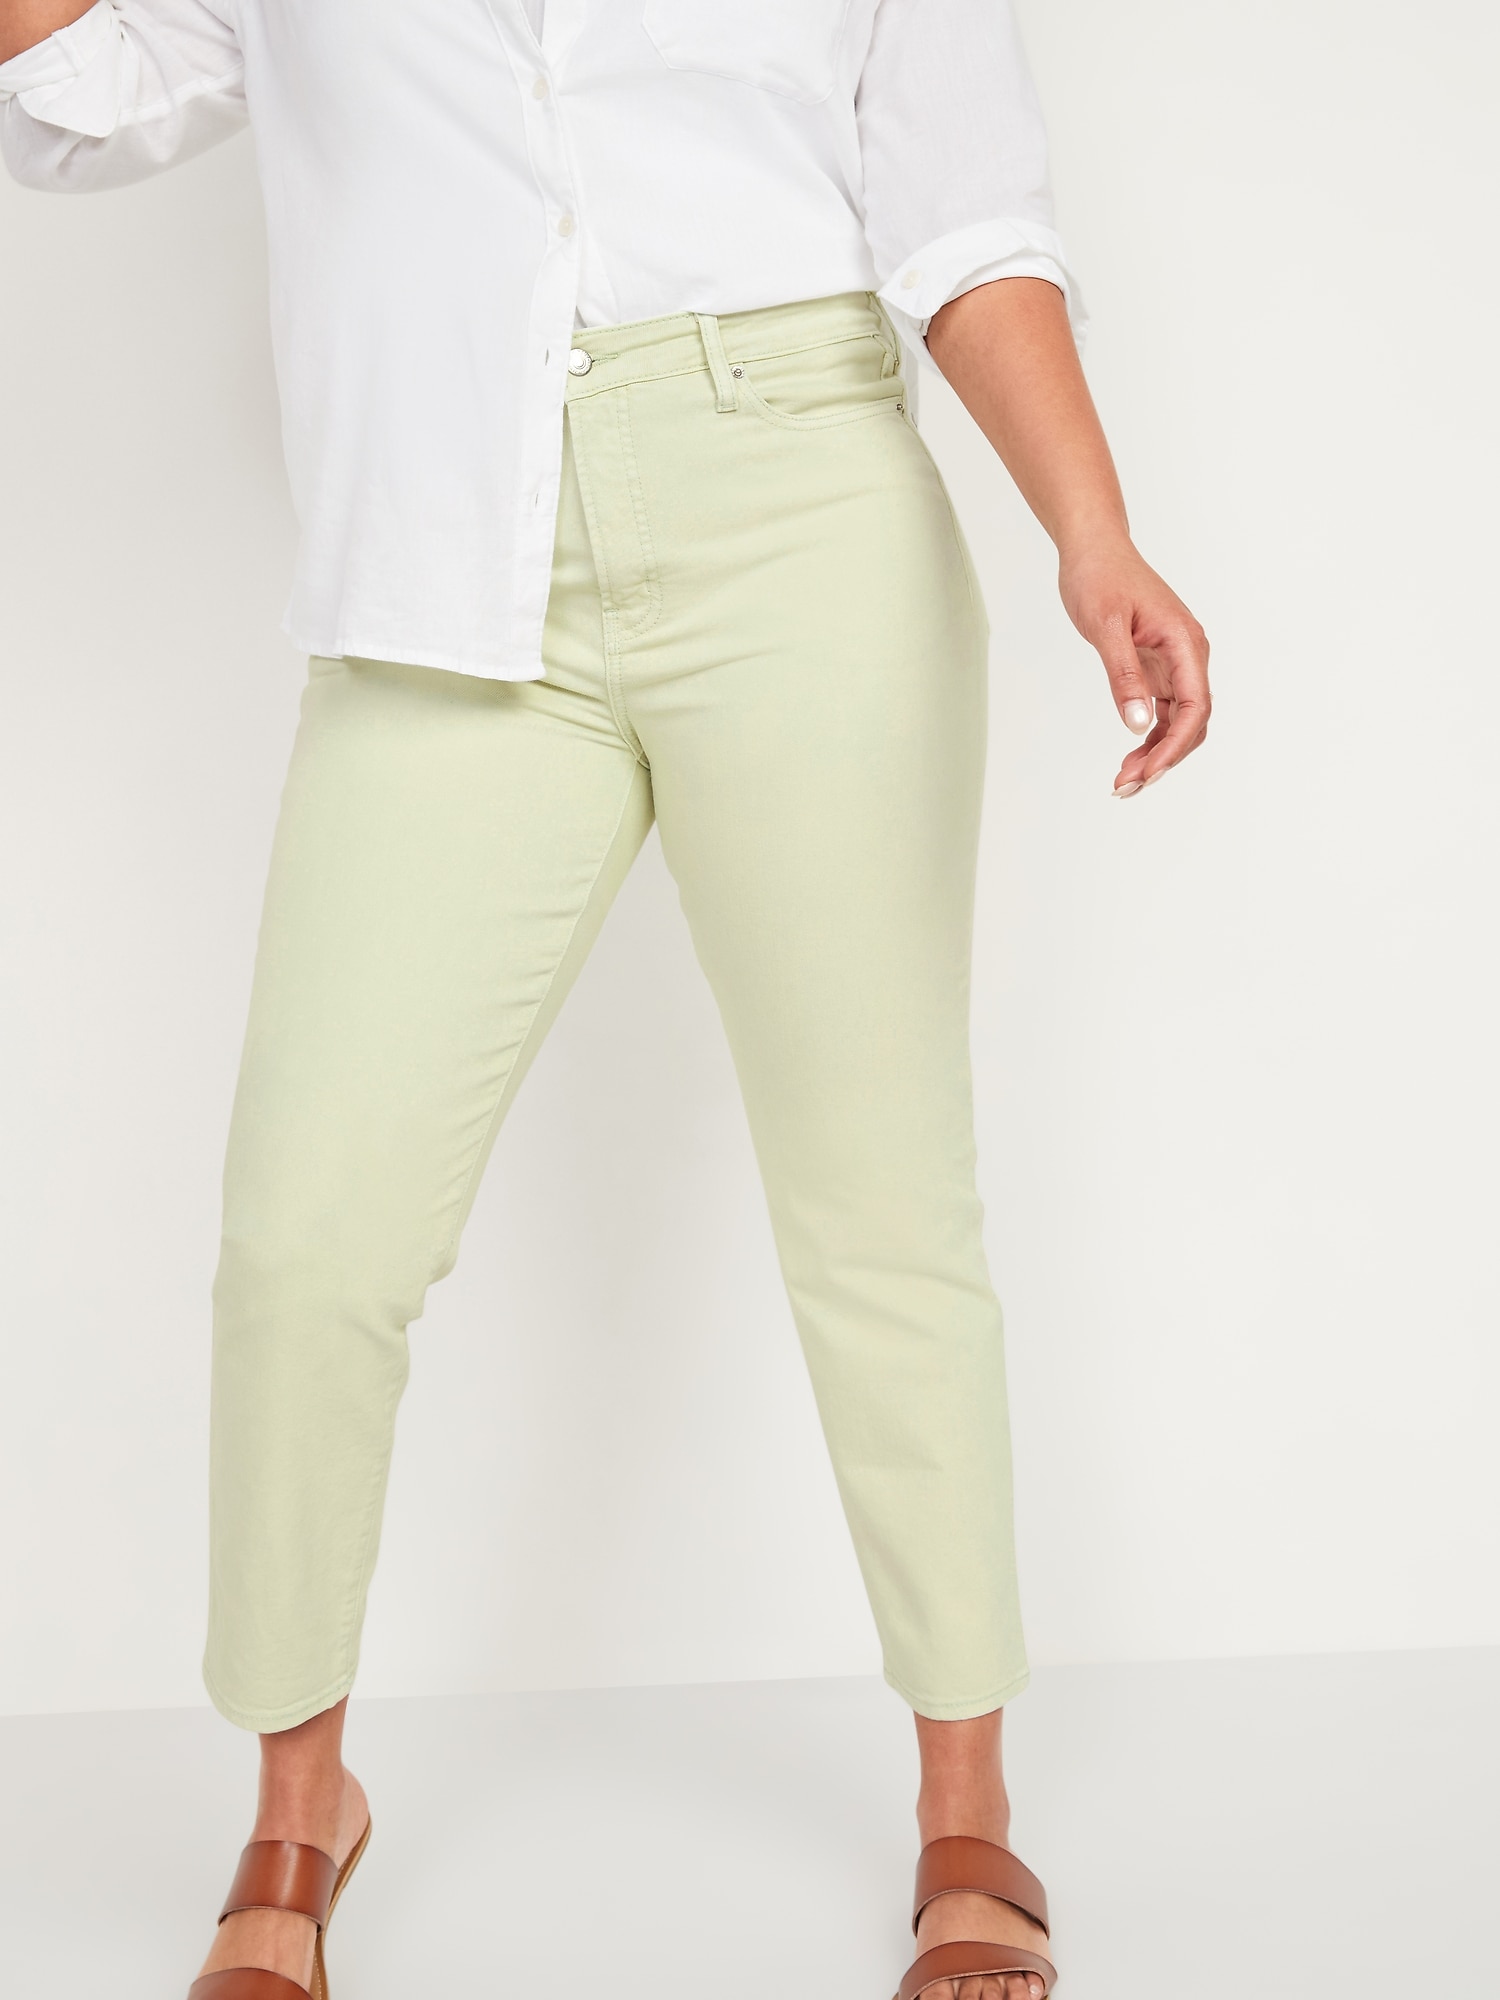 High-Waisted O.G. Straight Mineral-Dye Jeans for Women